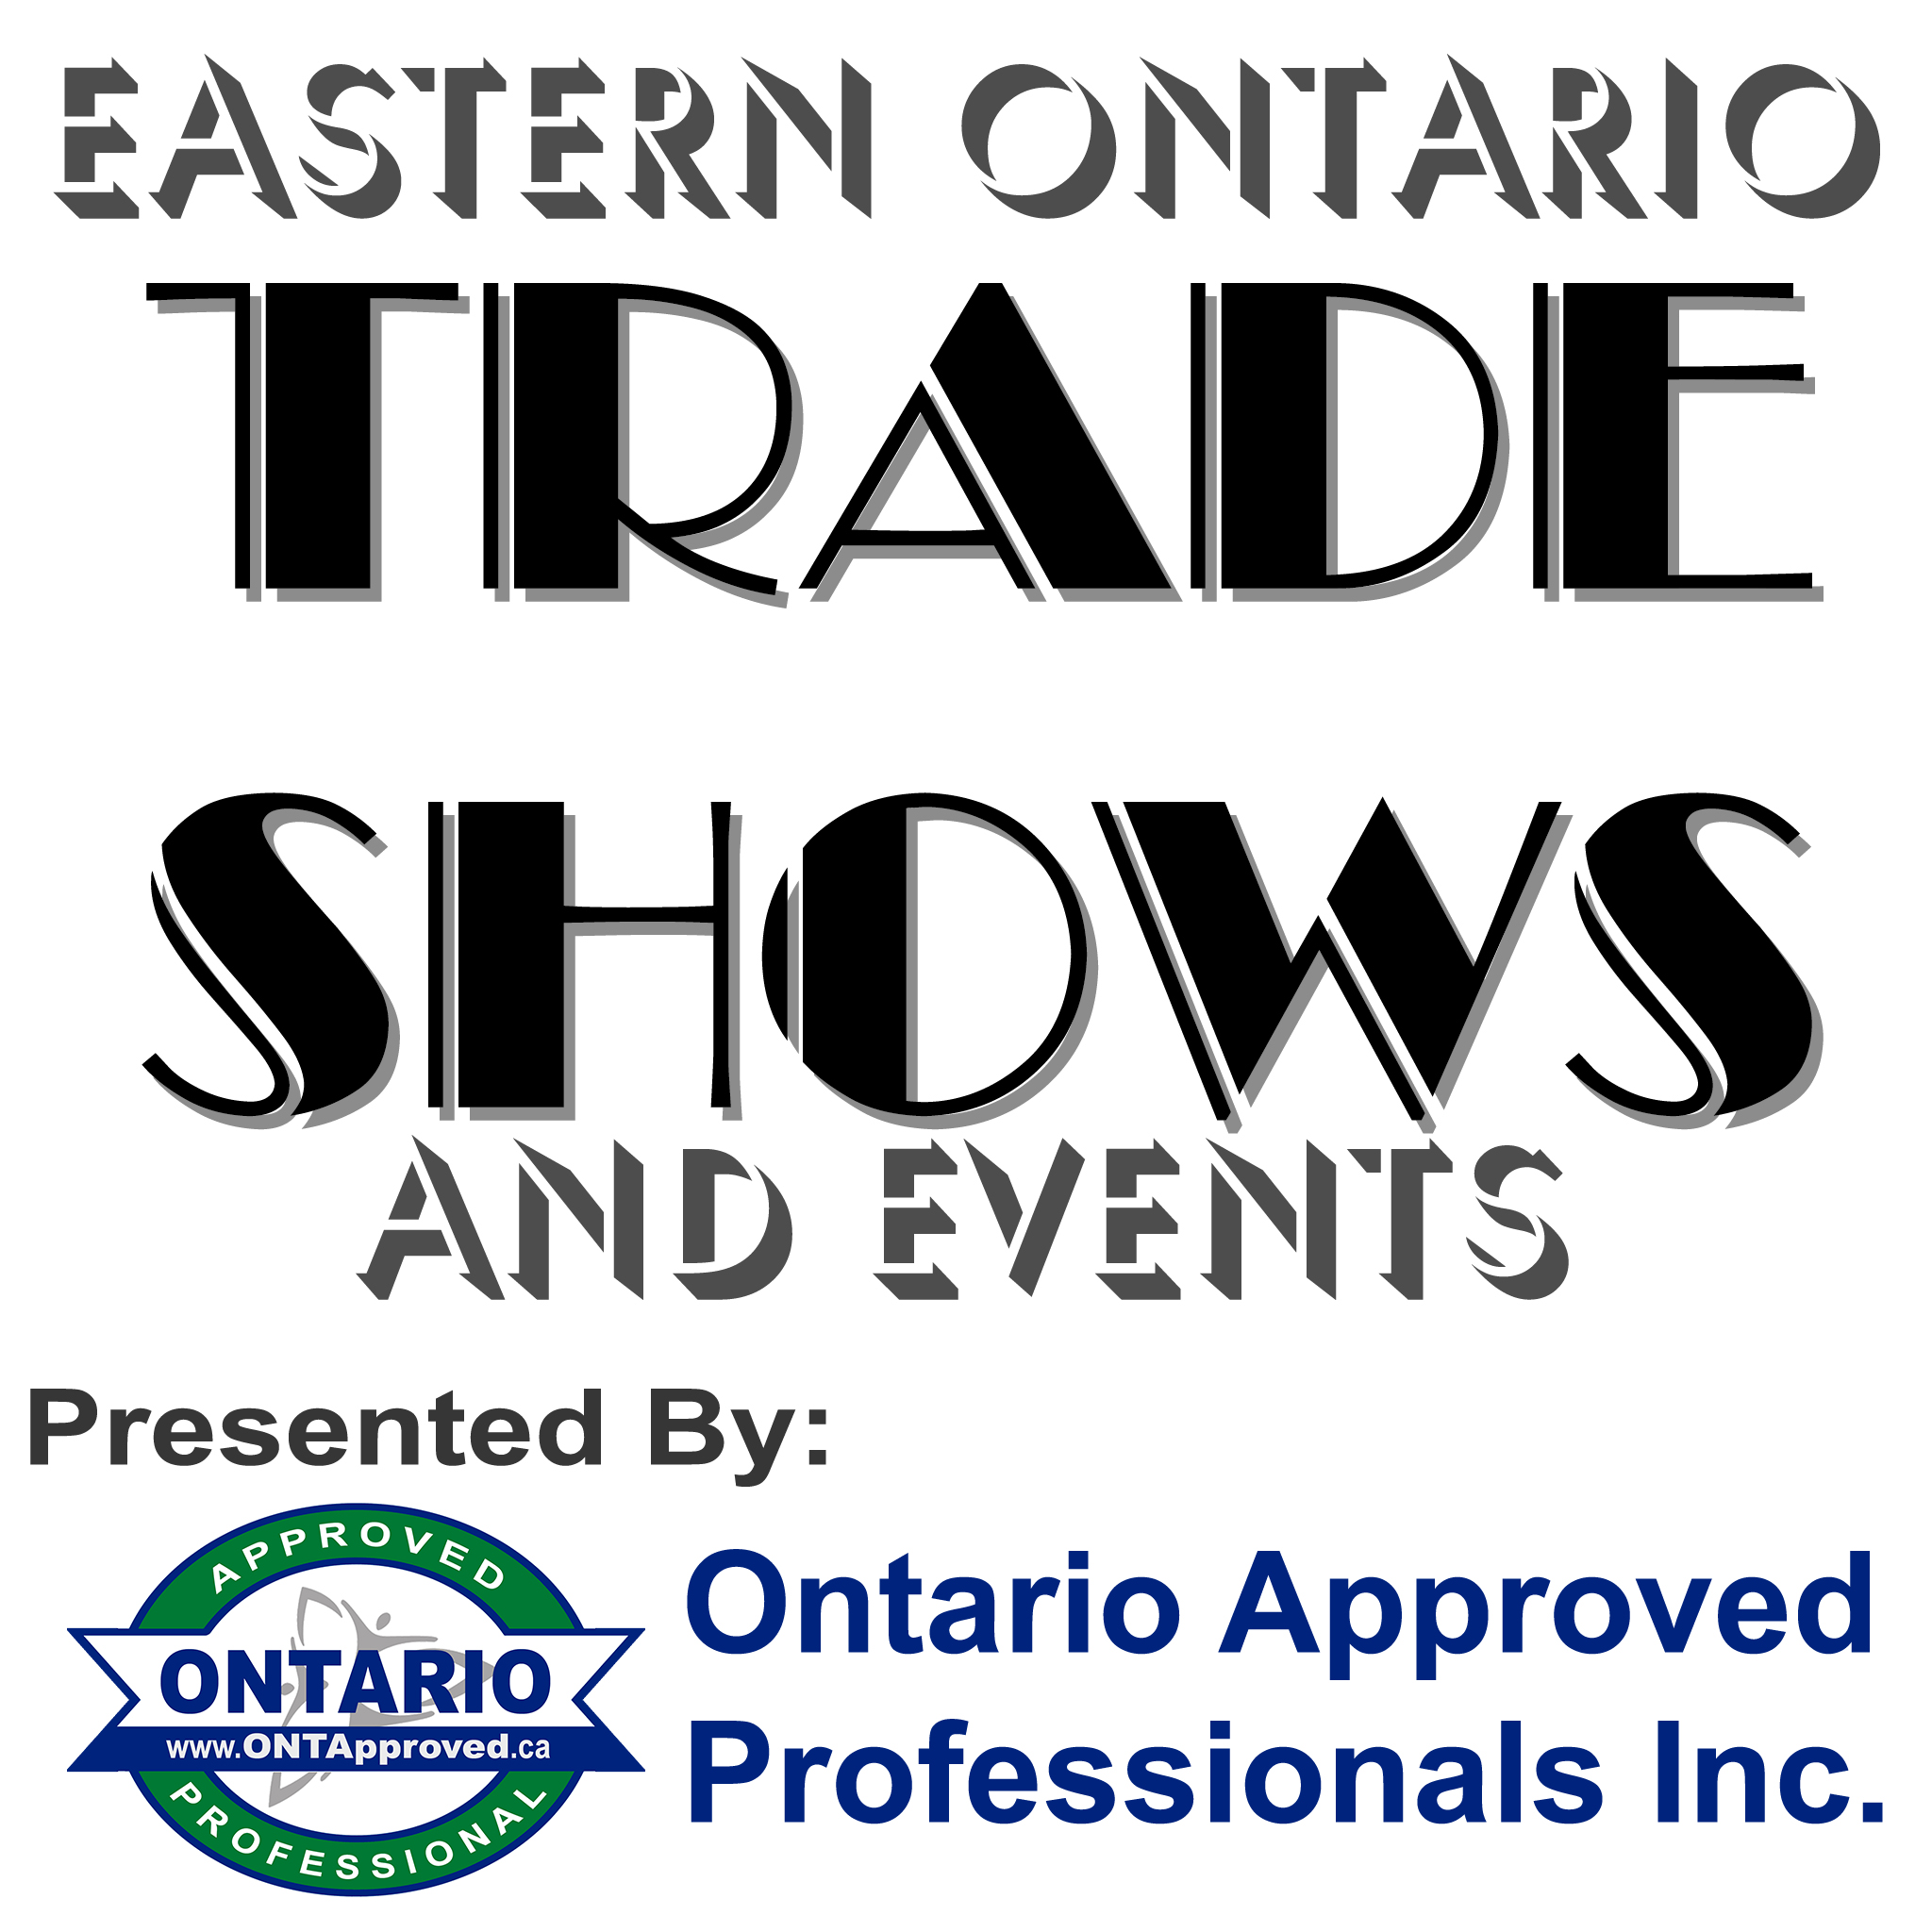 Ontario Approved Events